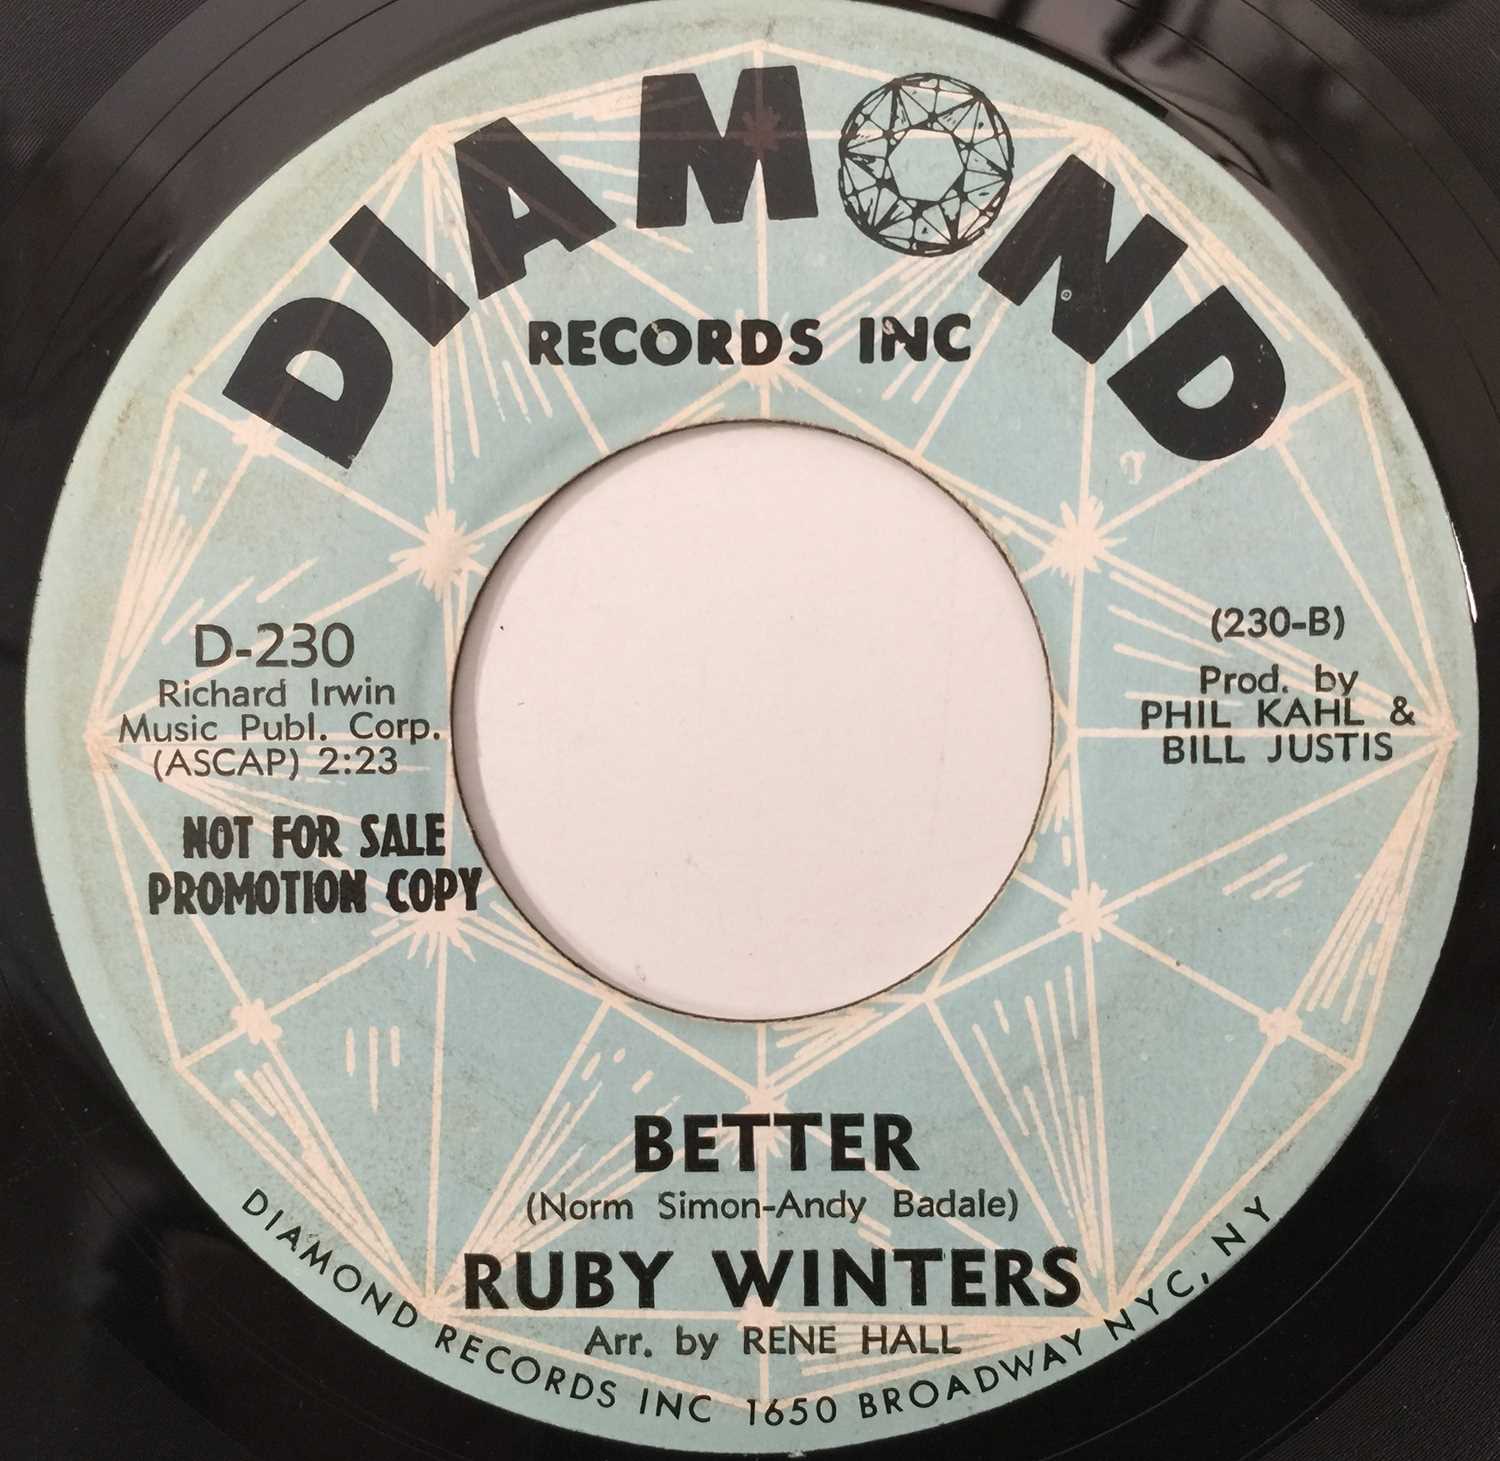 RUBY WINTERS - I WANT ACTION/ BETTER 7" (US PROMO - DIAMOND D-230) - Image 2 of 2